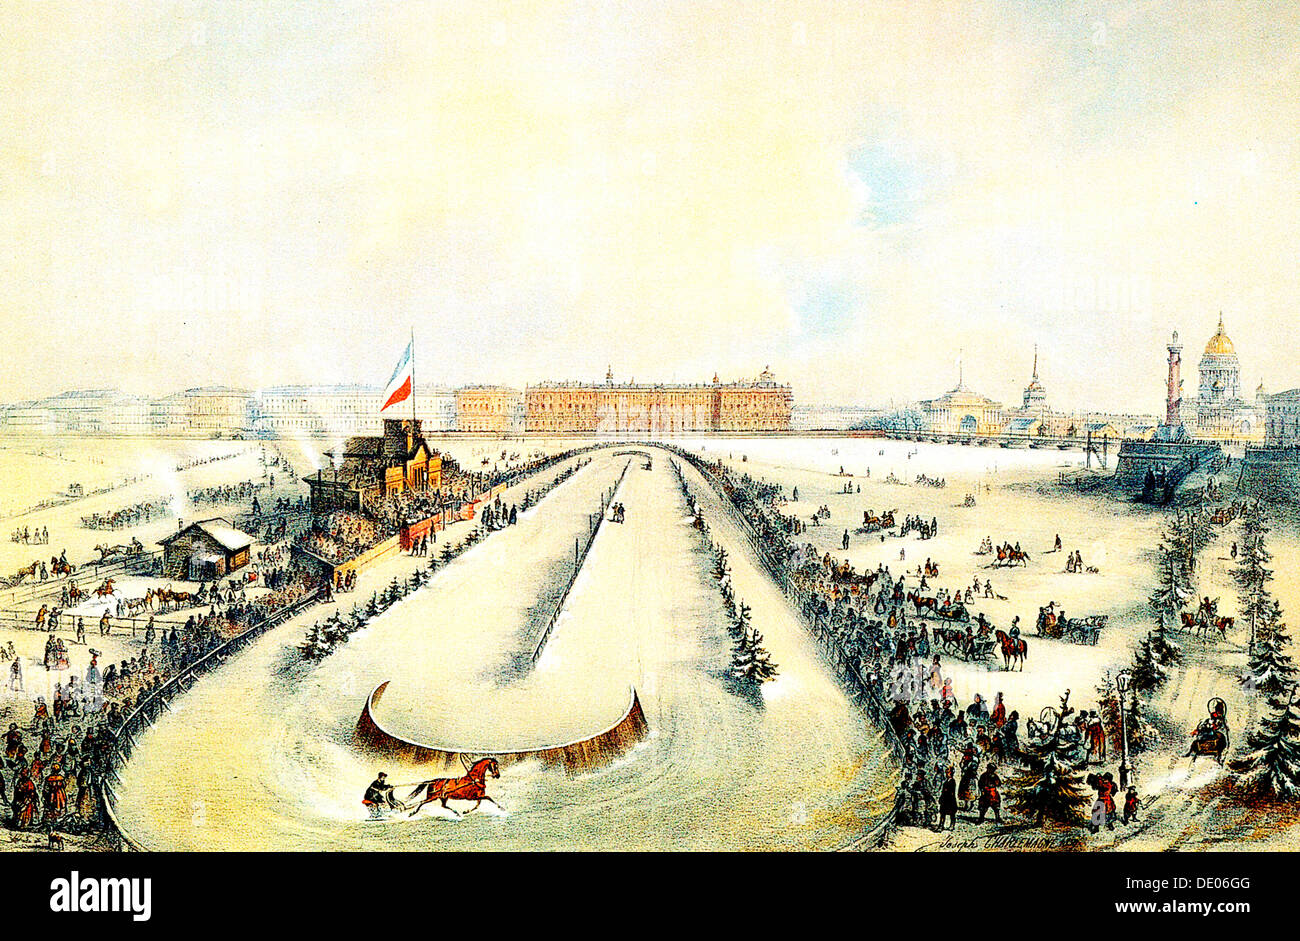 Horse racing on the frozen Neva River in St Petersburg, Russia, 1859.  Artist: Iosif Adolfovich Charlemagne Stock Photo